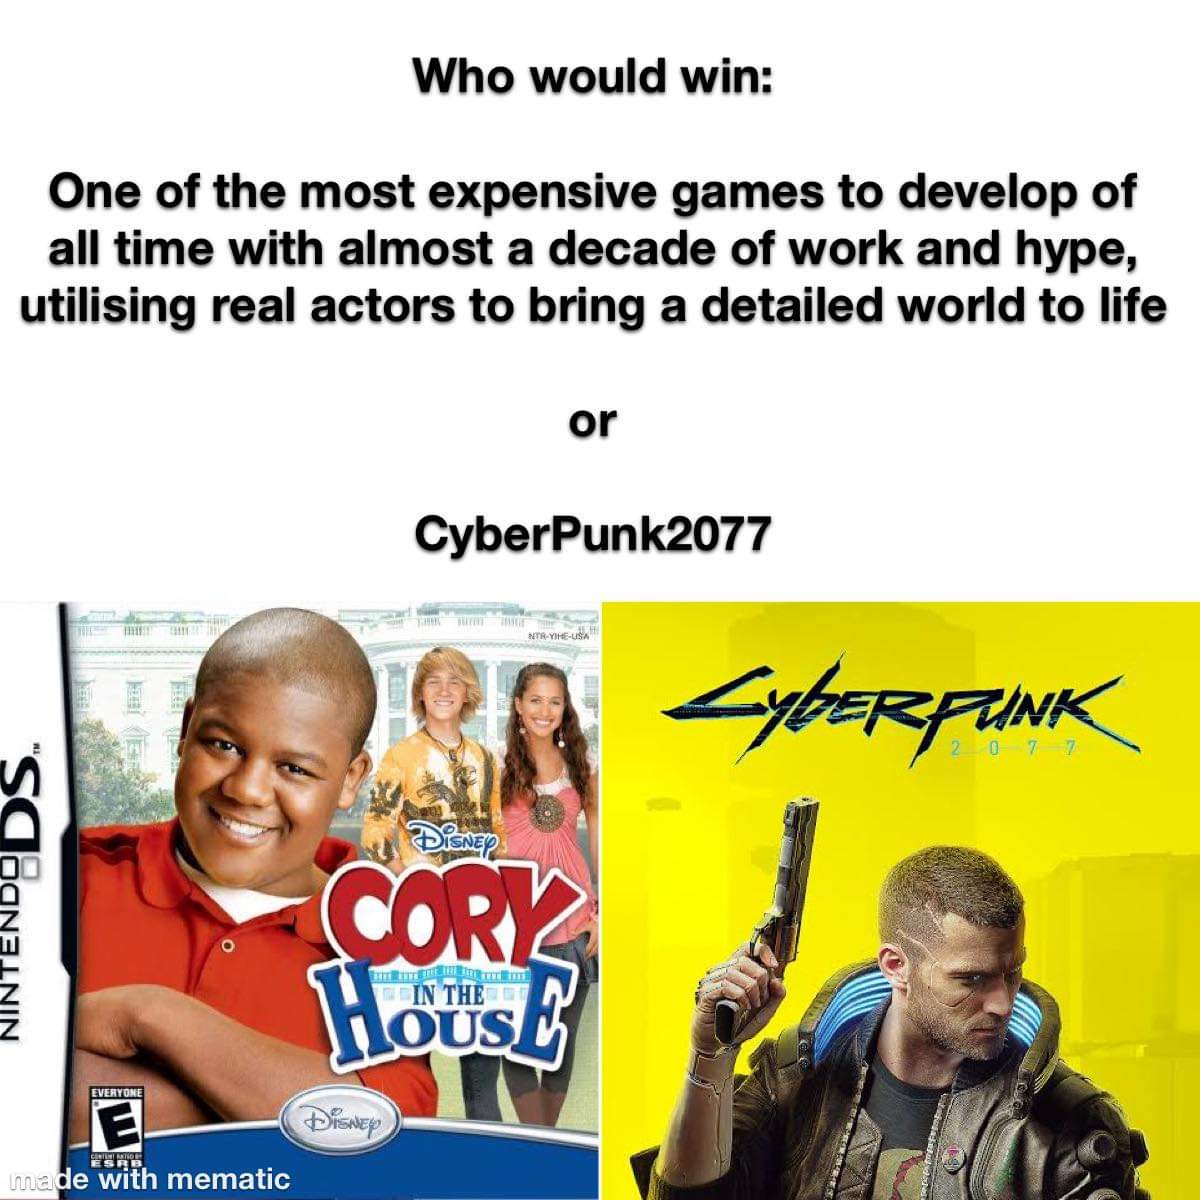 cyberpunk 2077 memes - Keanu Reeves - cory in the house - Who would win One of the most expensive games to develop of all time with almost a decade of work and hype, utilising real actors to bring a detailed world to life or CyberPunk 2077 Home NtrYireUsa